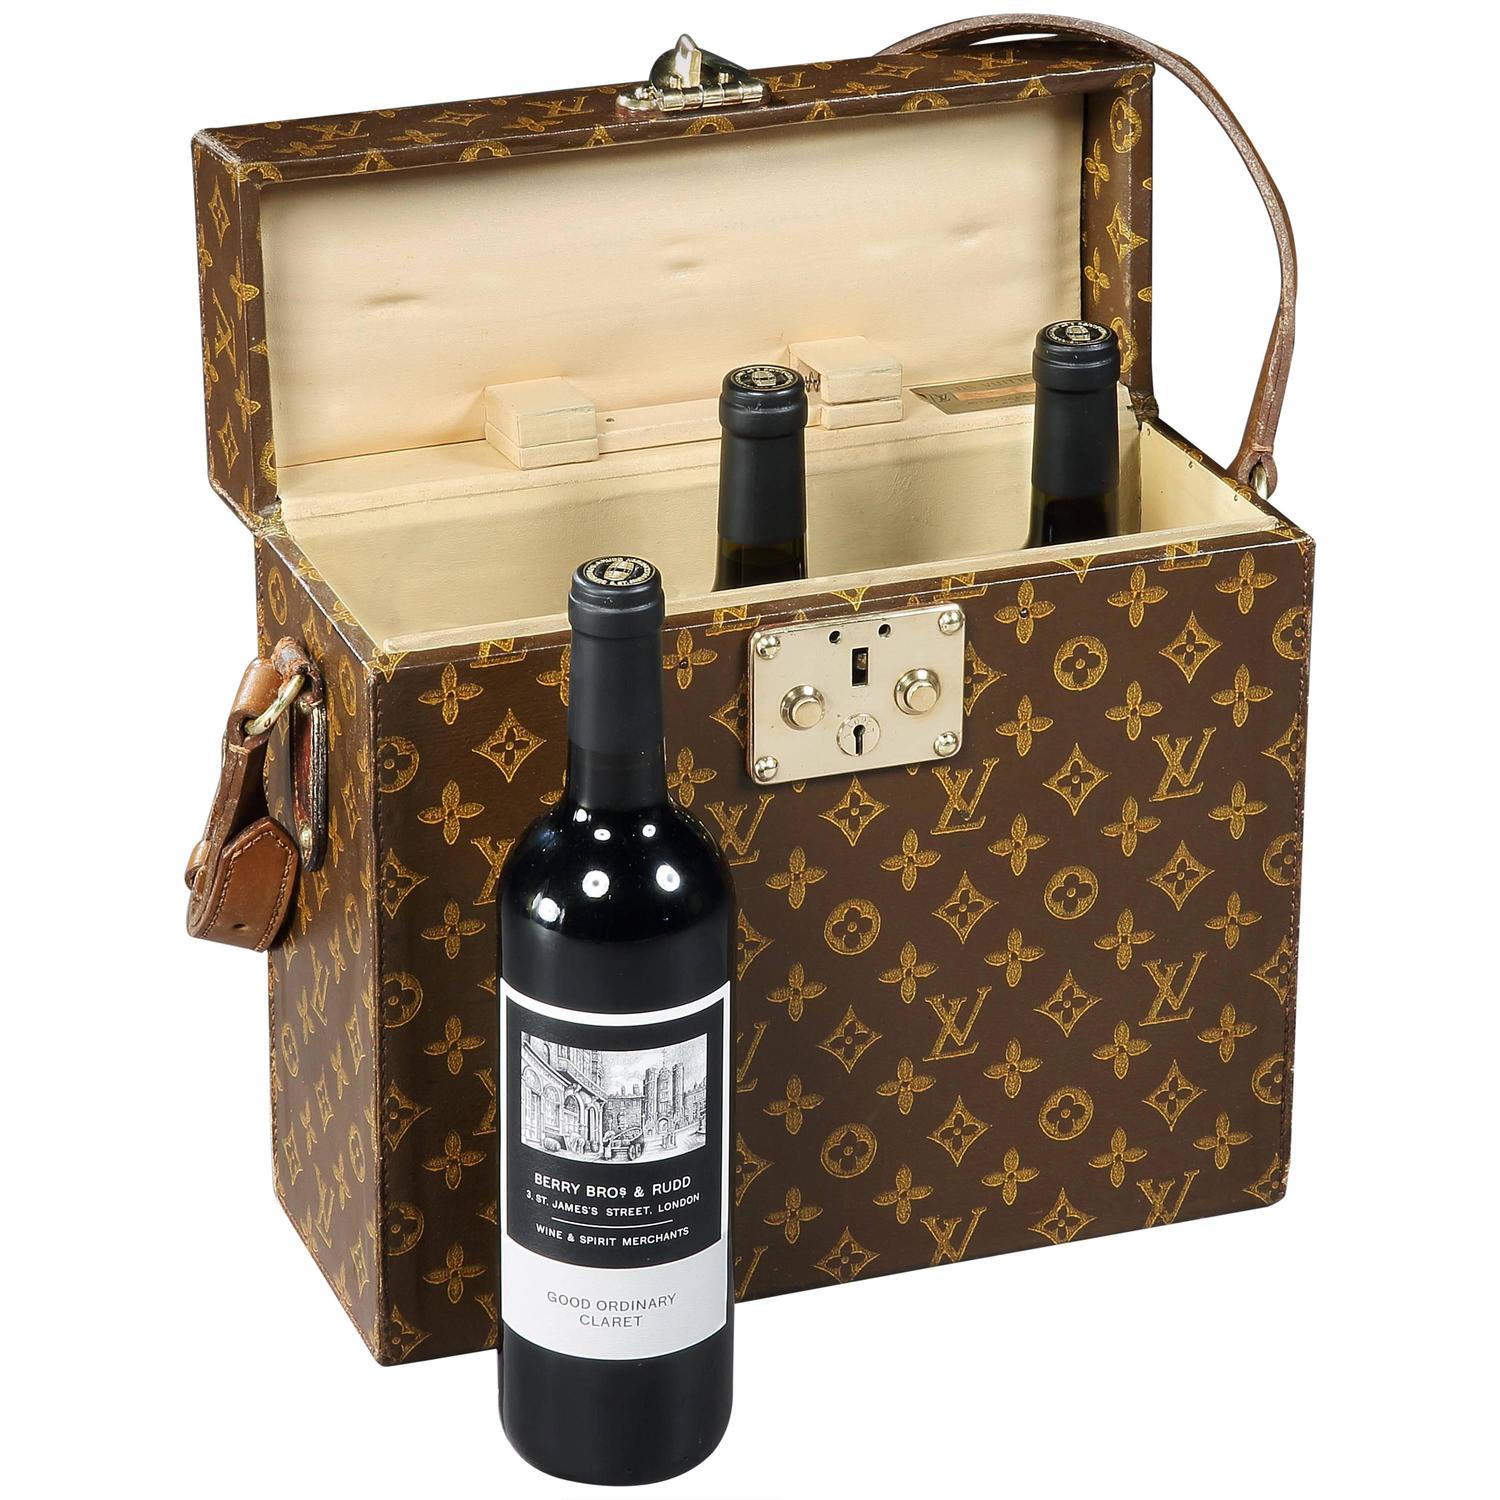 Louis Vuitton Wine Bottle Carrier, 1930s For Sale at 1stdibs